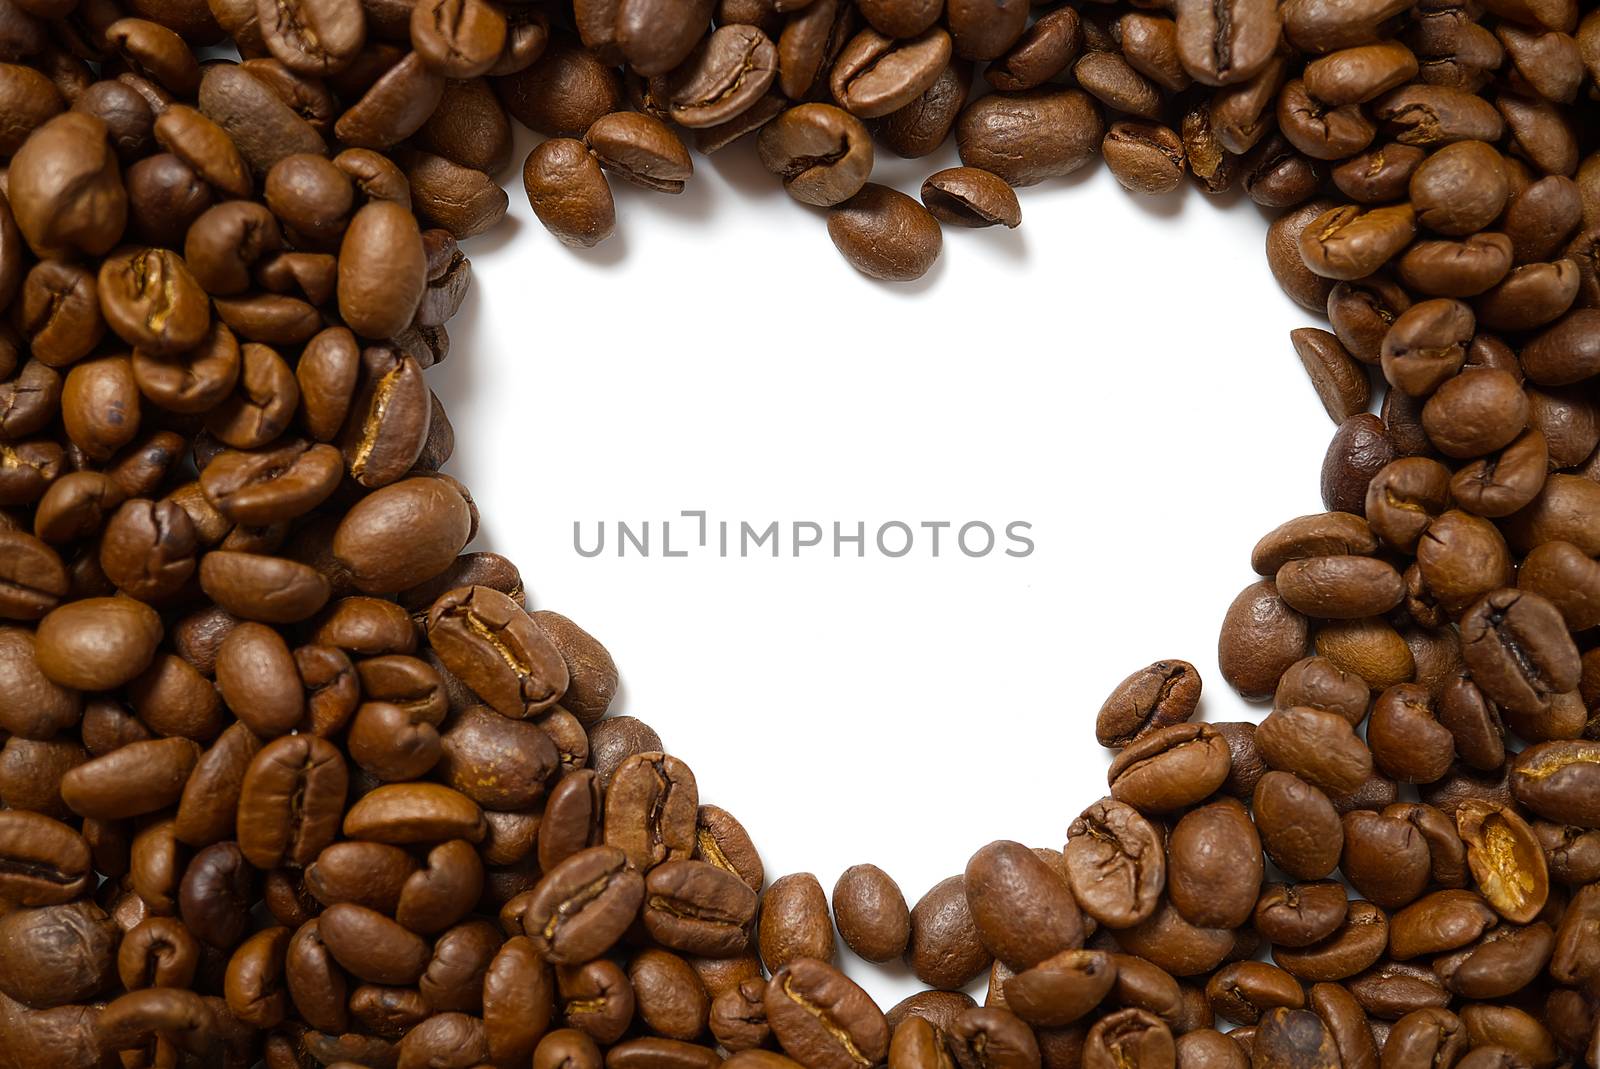 heart frame of coffee beans isolated on white background may use as background or texture. I love coffee concept.